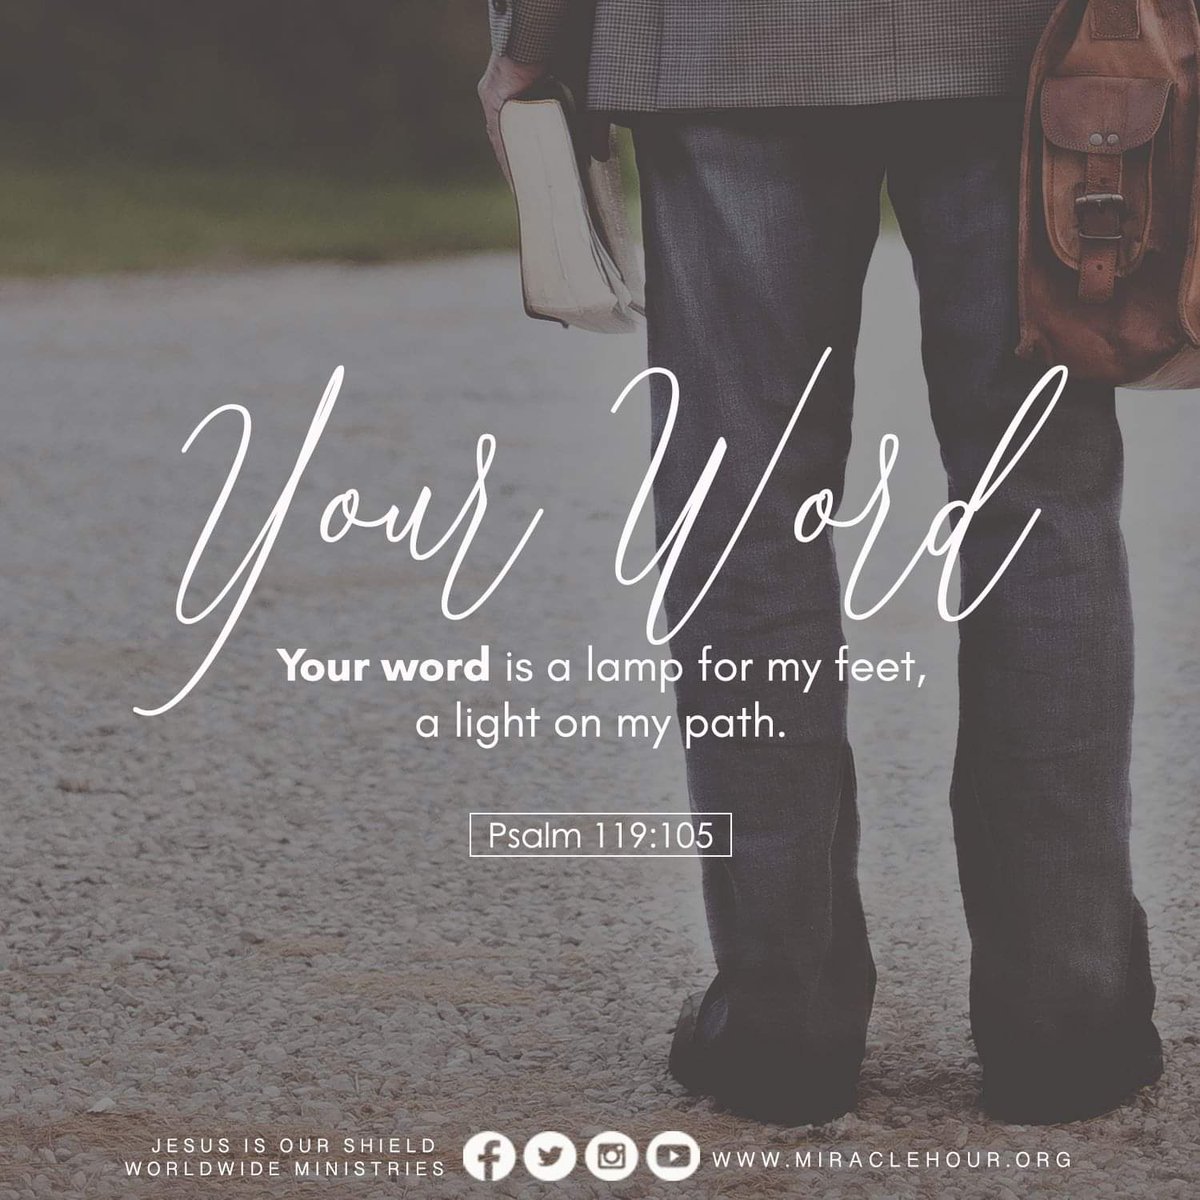 Your word is a lamp for my feet, a light on my path. -Psalm 119:105
#VerseOfTheDay
#NationalBibleDay